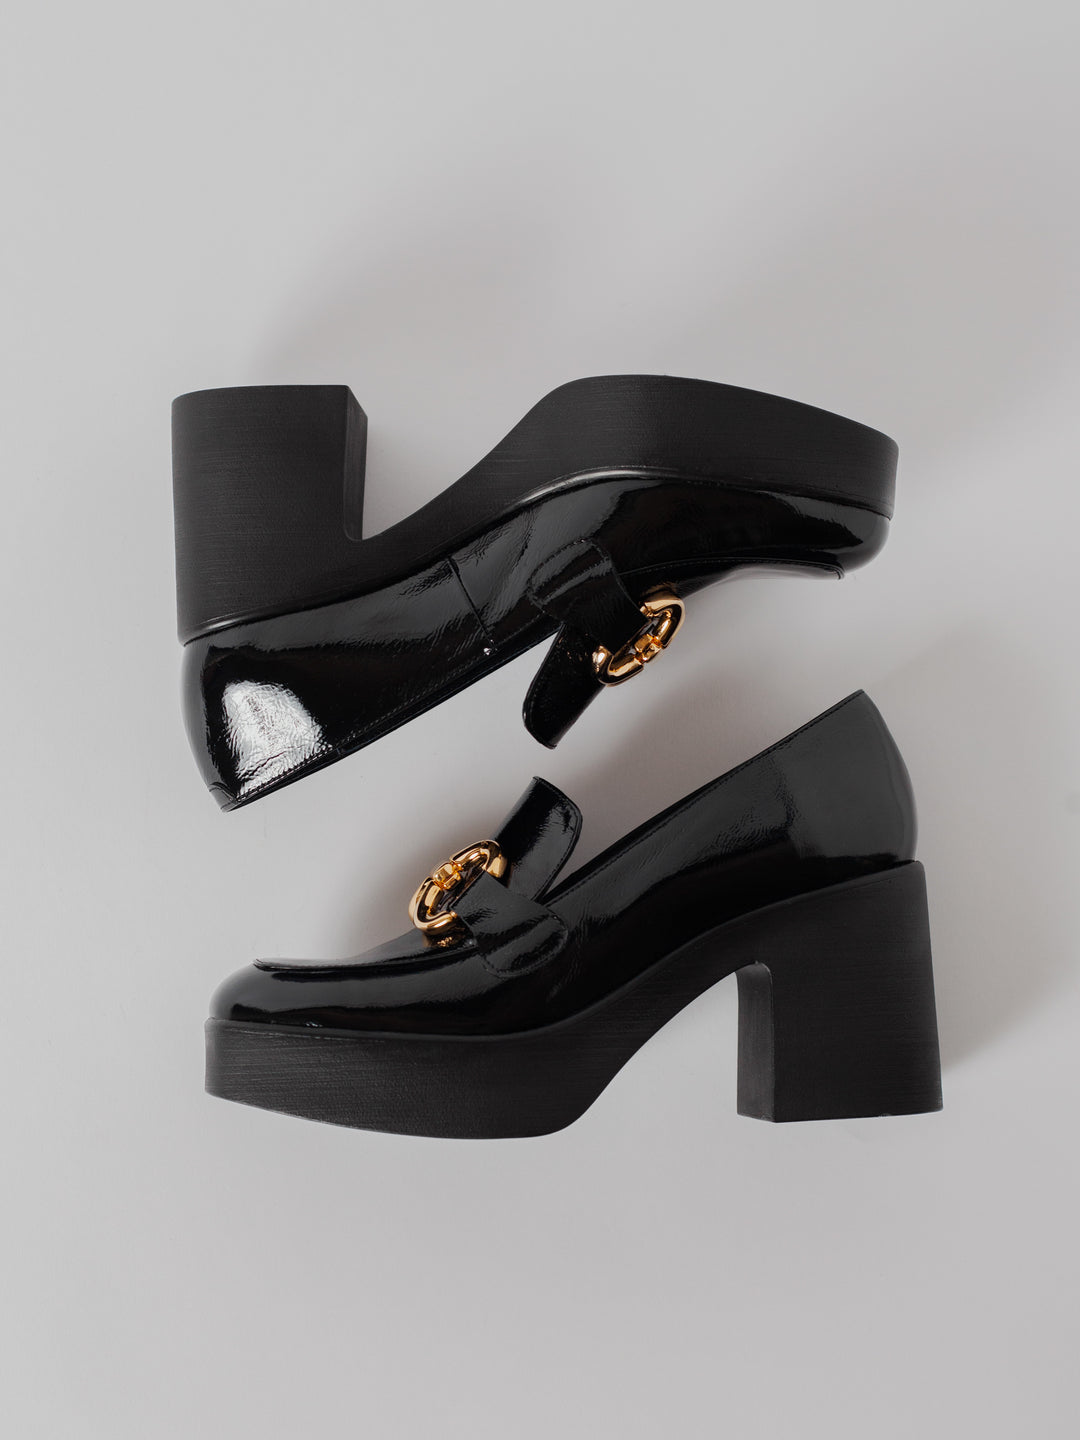 Blankens The Olivia platform heeled loafer with bold gold buckle. Comfortable and lightweight